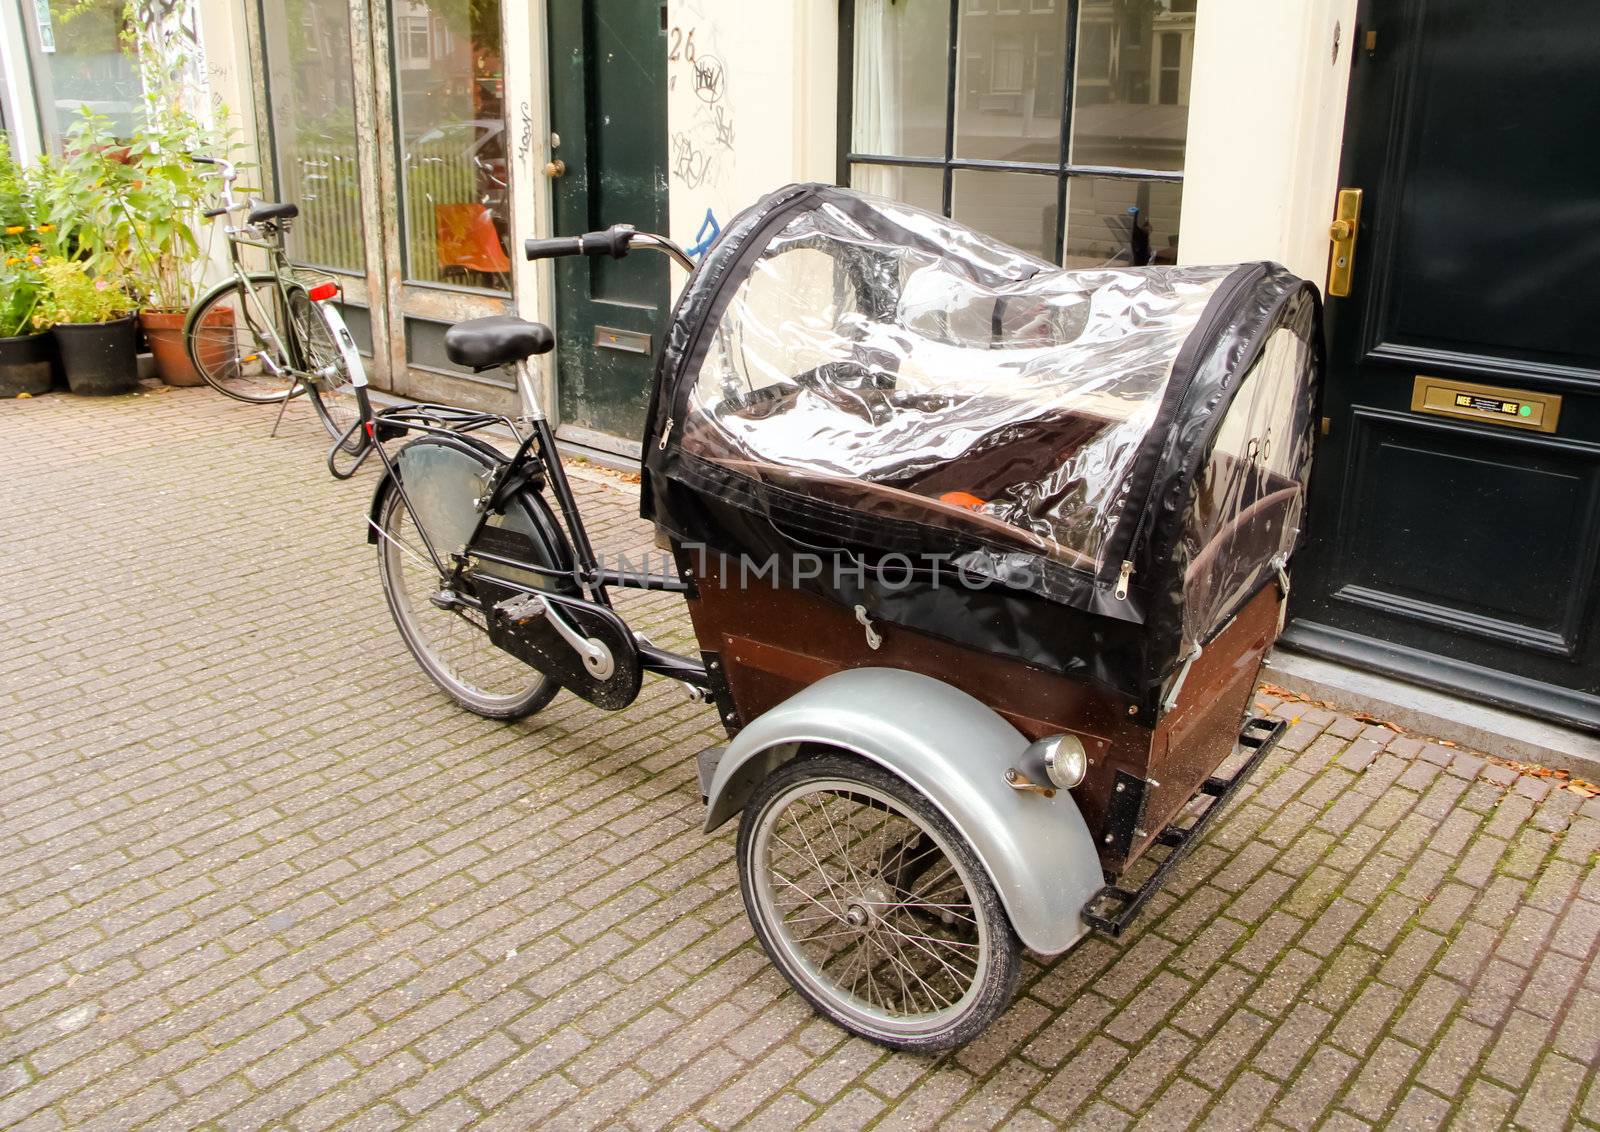 Three wheels black retro bicycle with wooden casing cover on a street of Amsterdam.